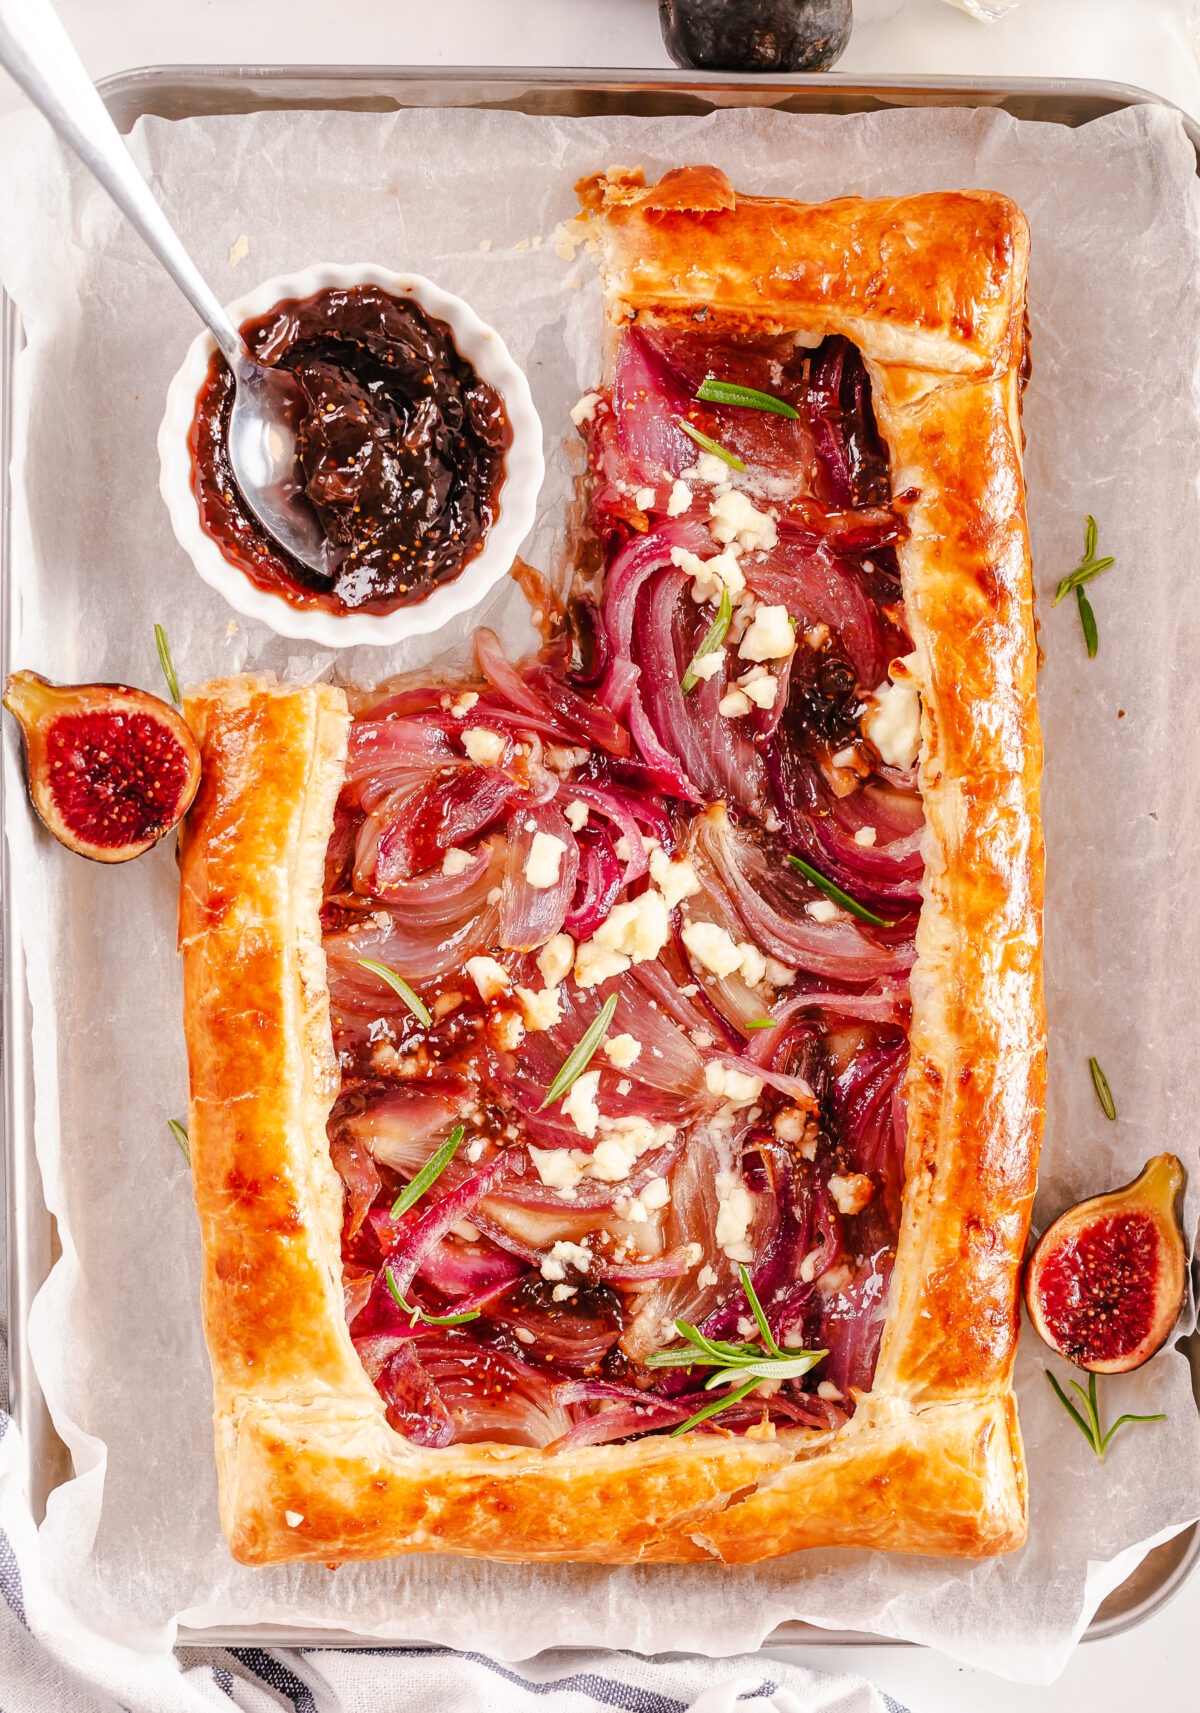 Up your dinner party game with this Caramelized Onion Tart recipe. With puff pastry, red onions, and feta cheese, it's an easy crowd pleaser.